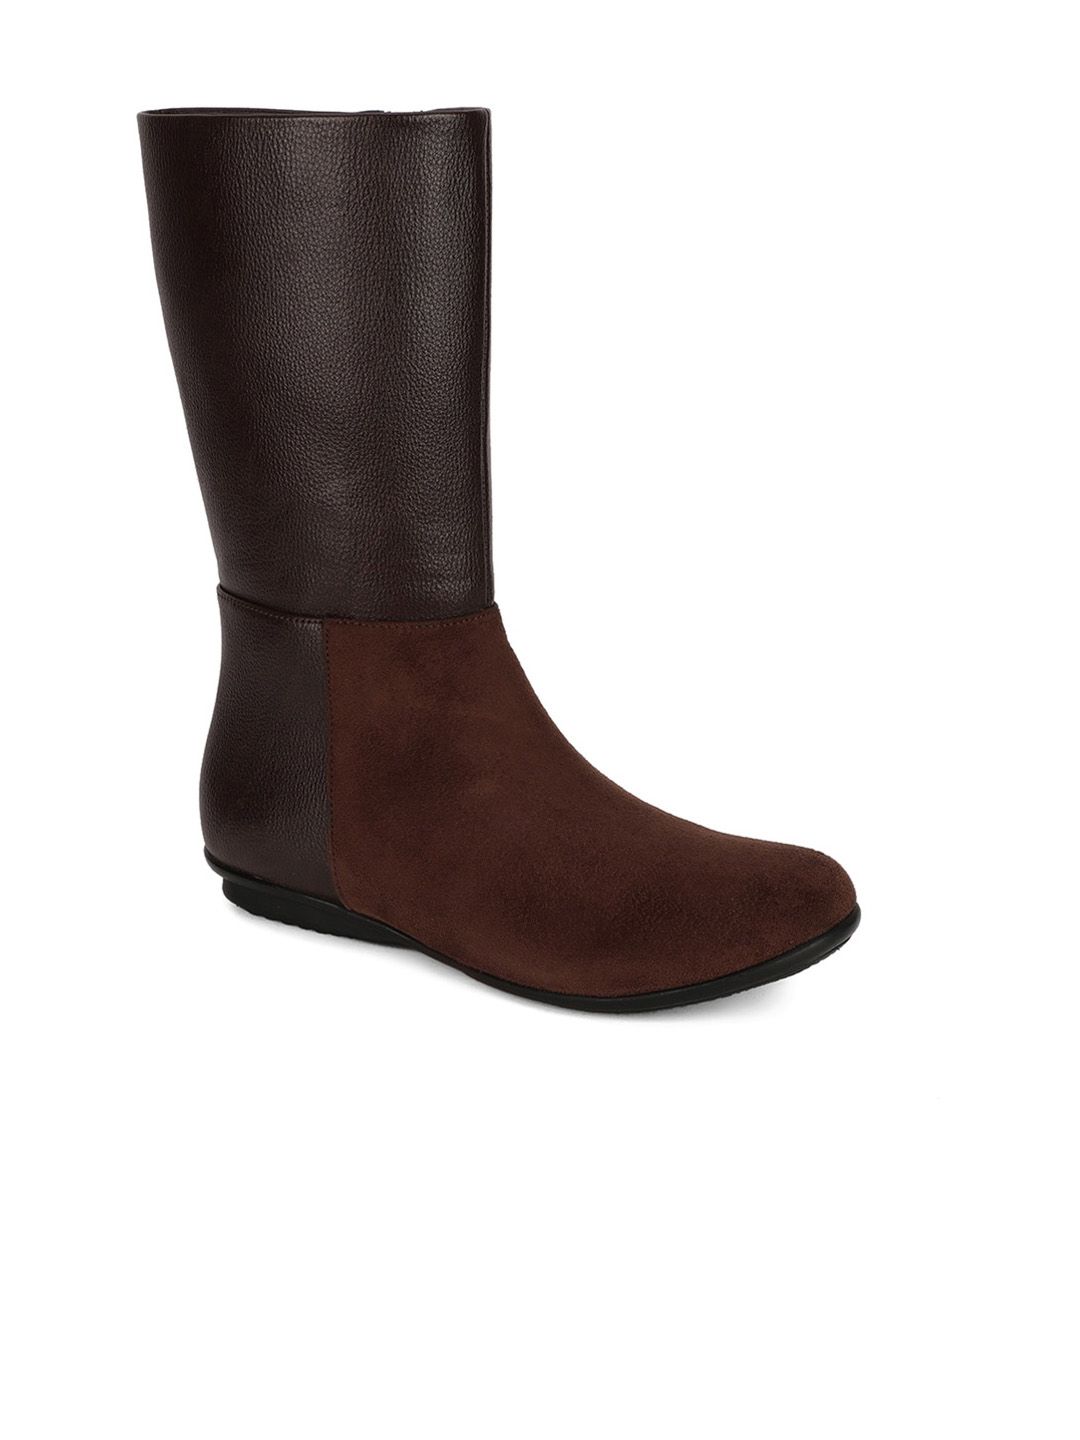 Bruno Manetti Brown Suede Comfort Heeled Boots Price in India